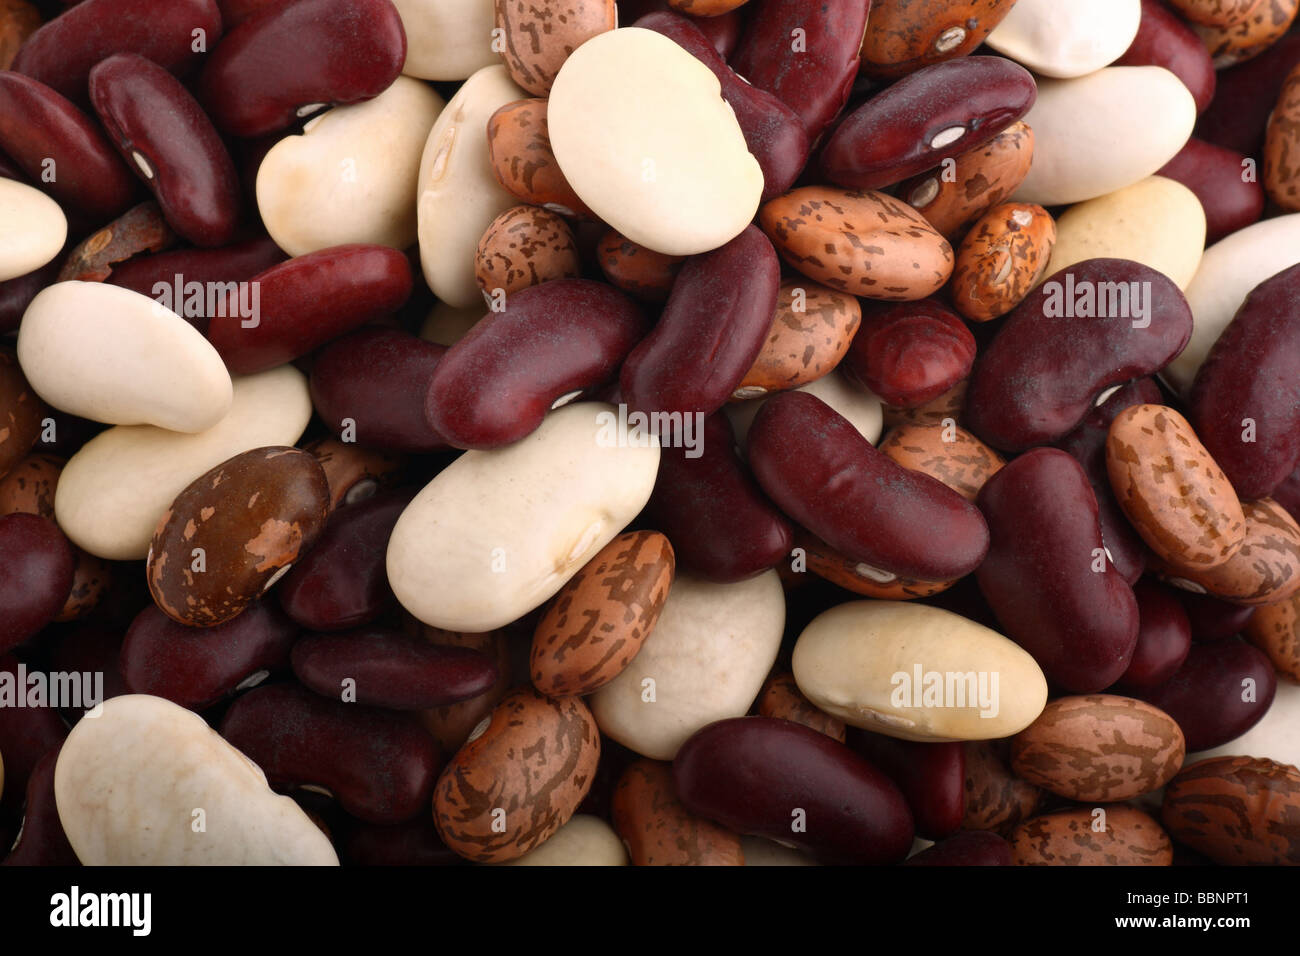 Beans background containing three species of genus Phaseolus Stock Photo